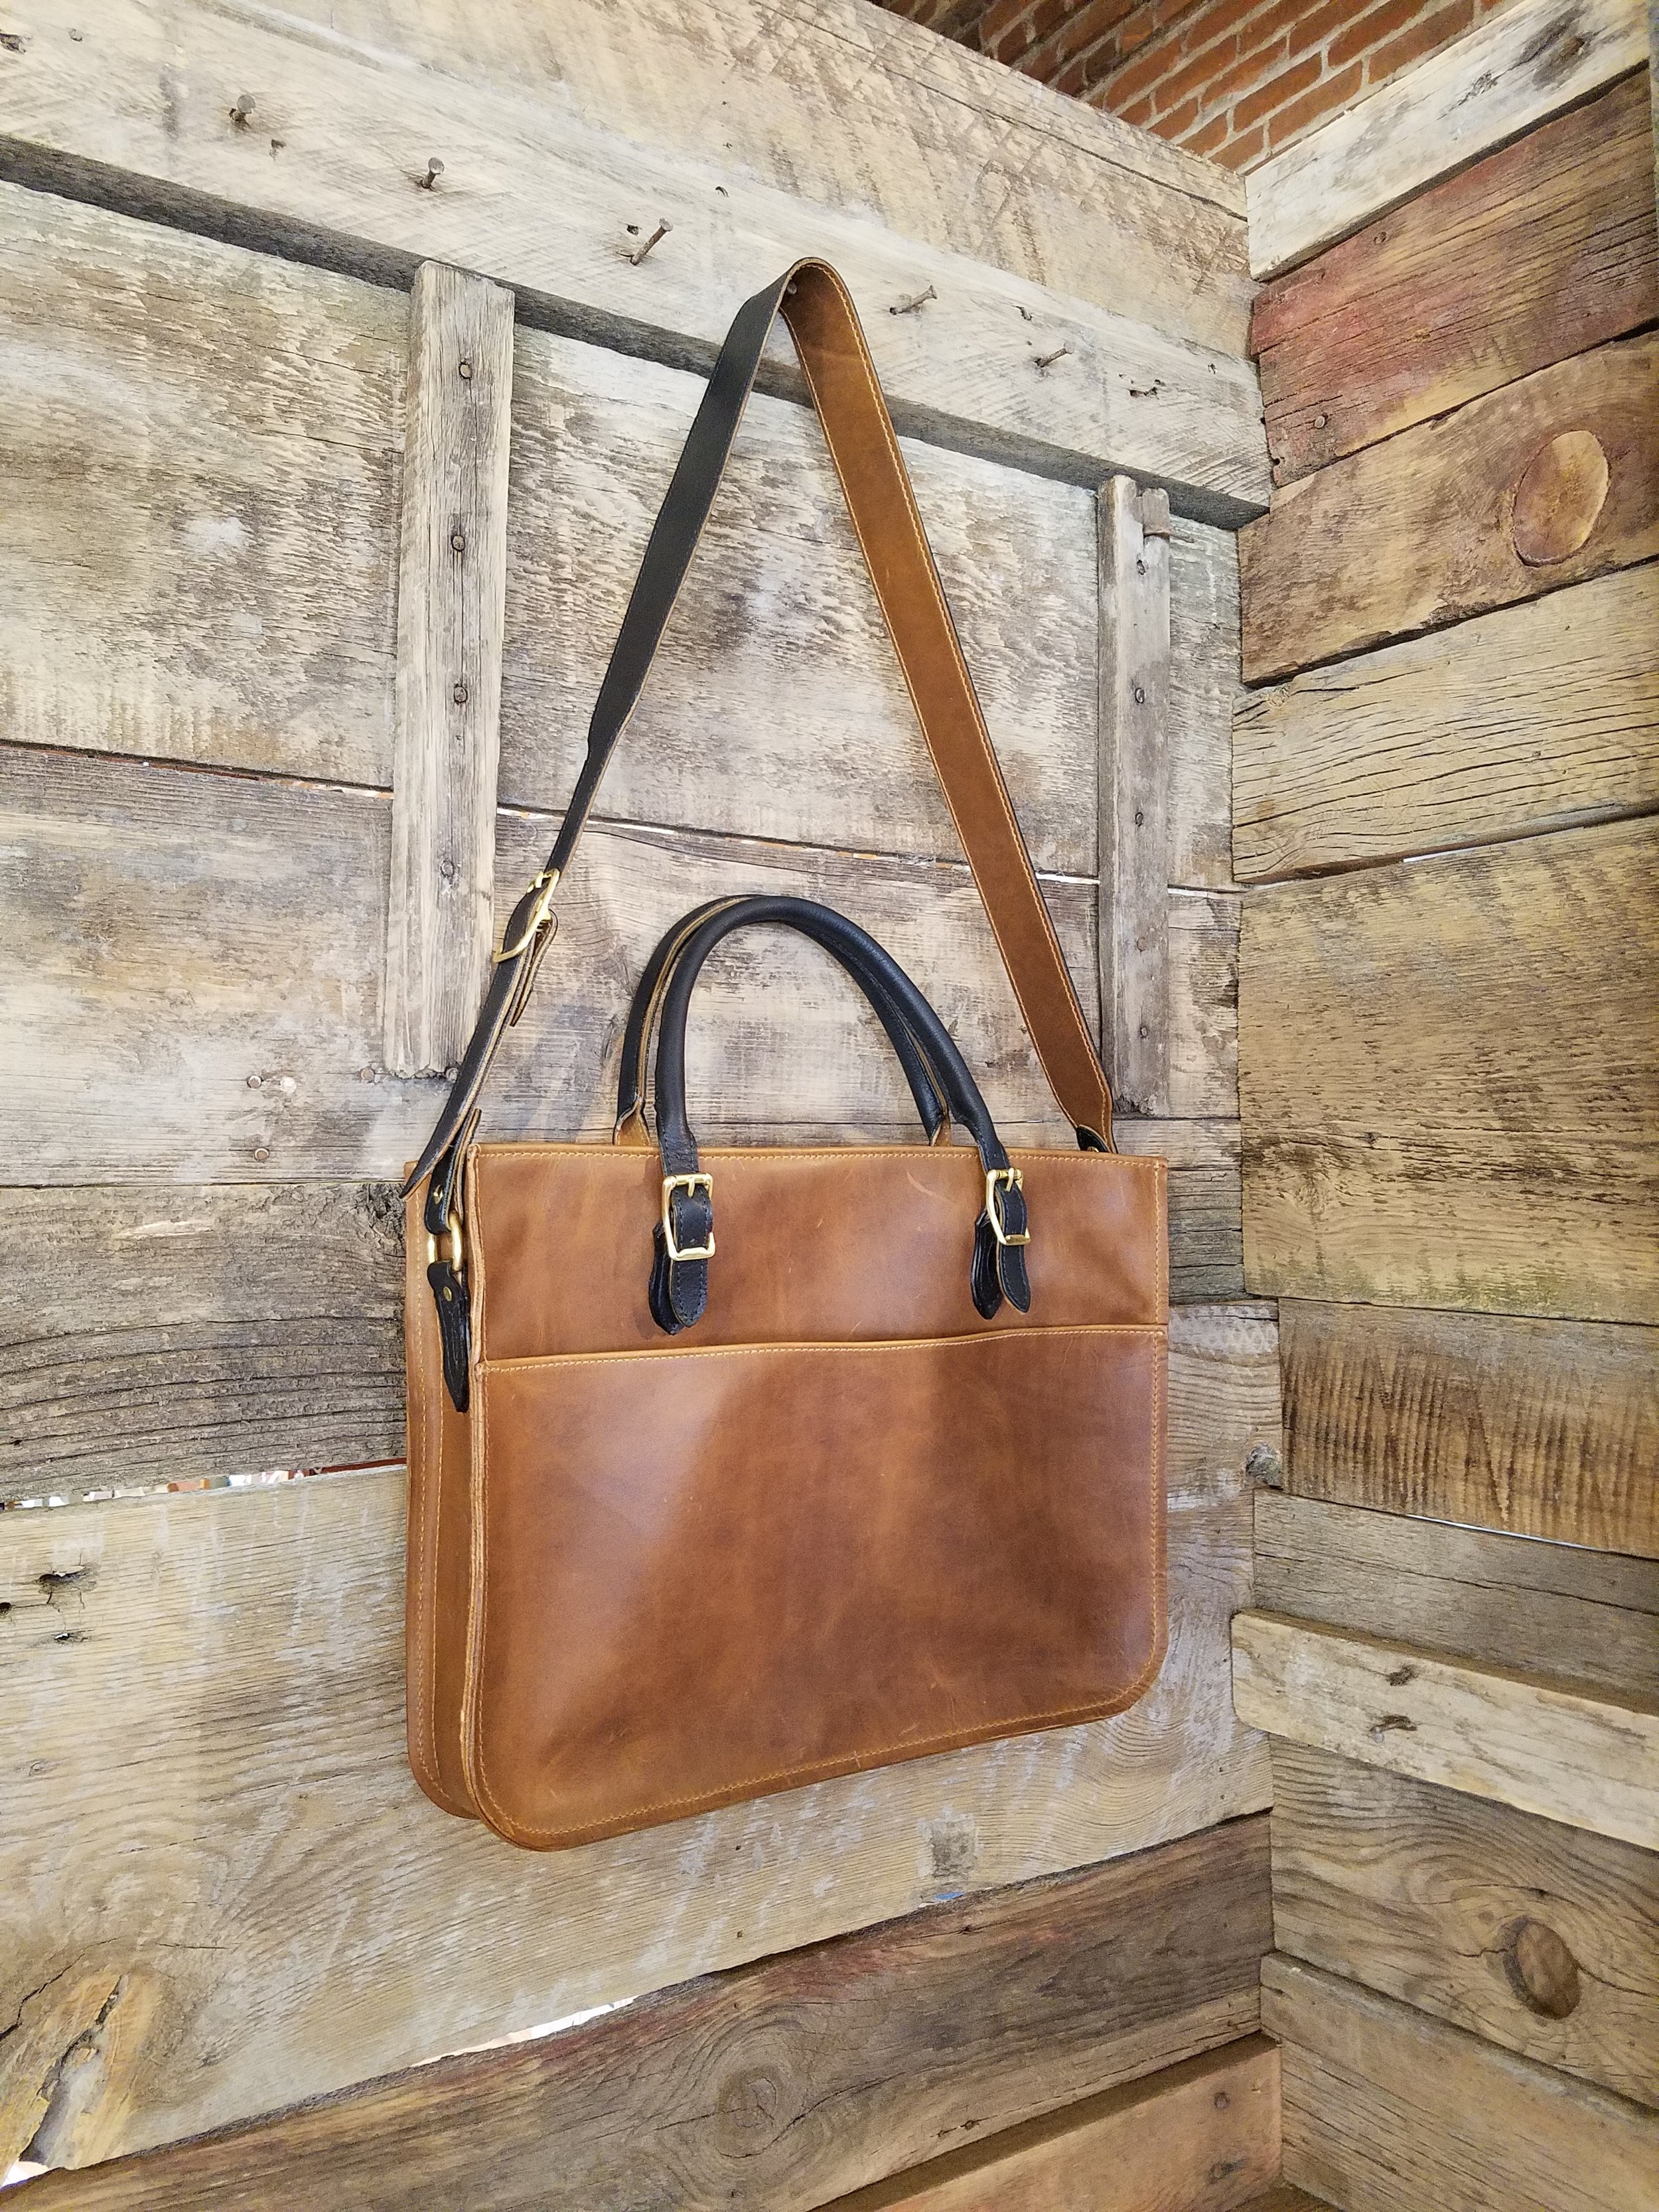 Briefcase made student at Alden's School of Leather Trades